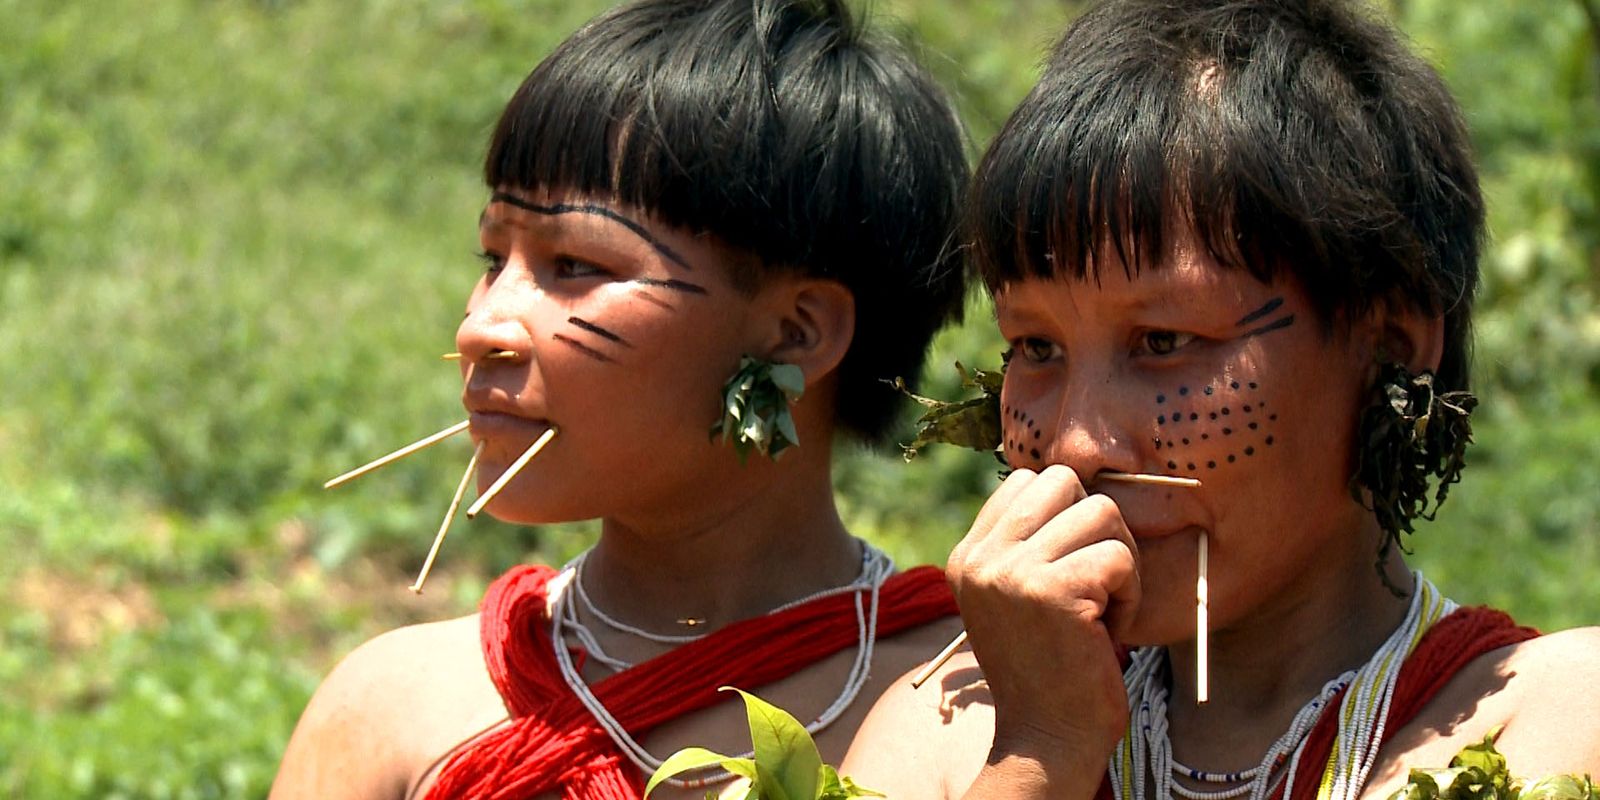 More than half of the Yanomami live in threatened health conditions